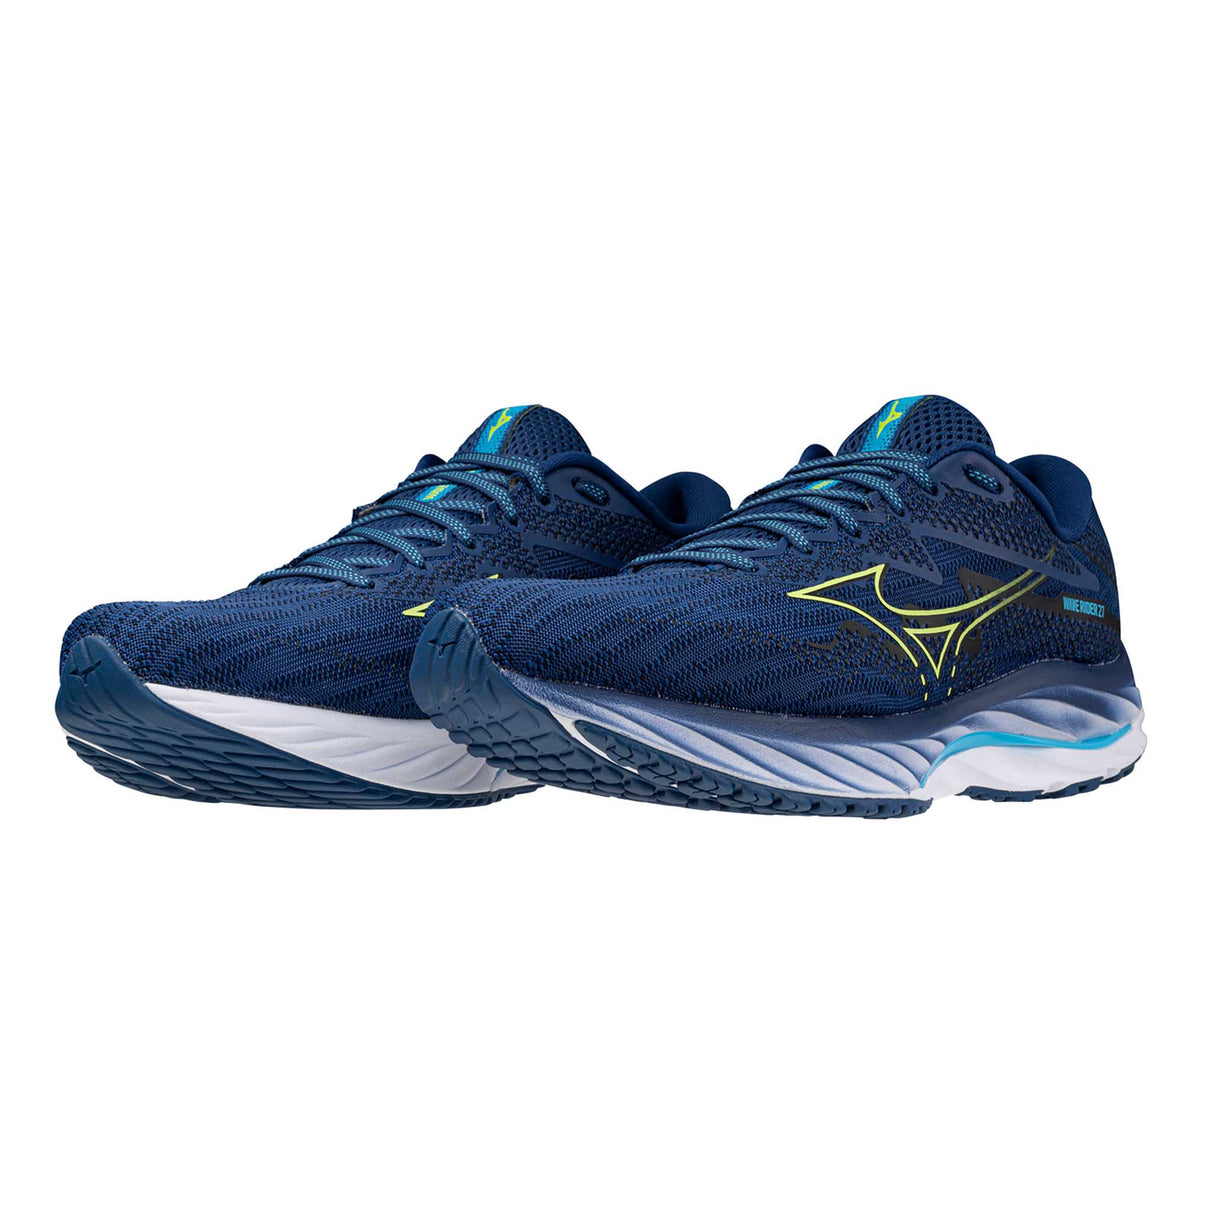 Mizuno Wave Rider 27 chaussures de course à pied homme paire - Navy Peony / Sharp Green